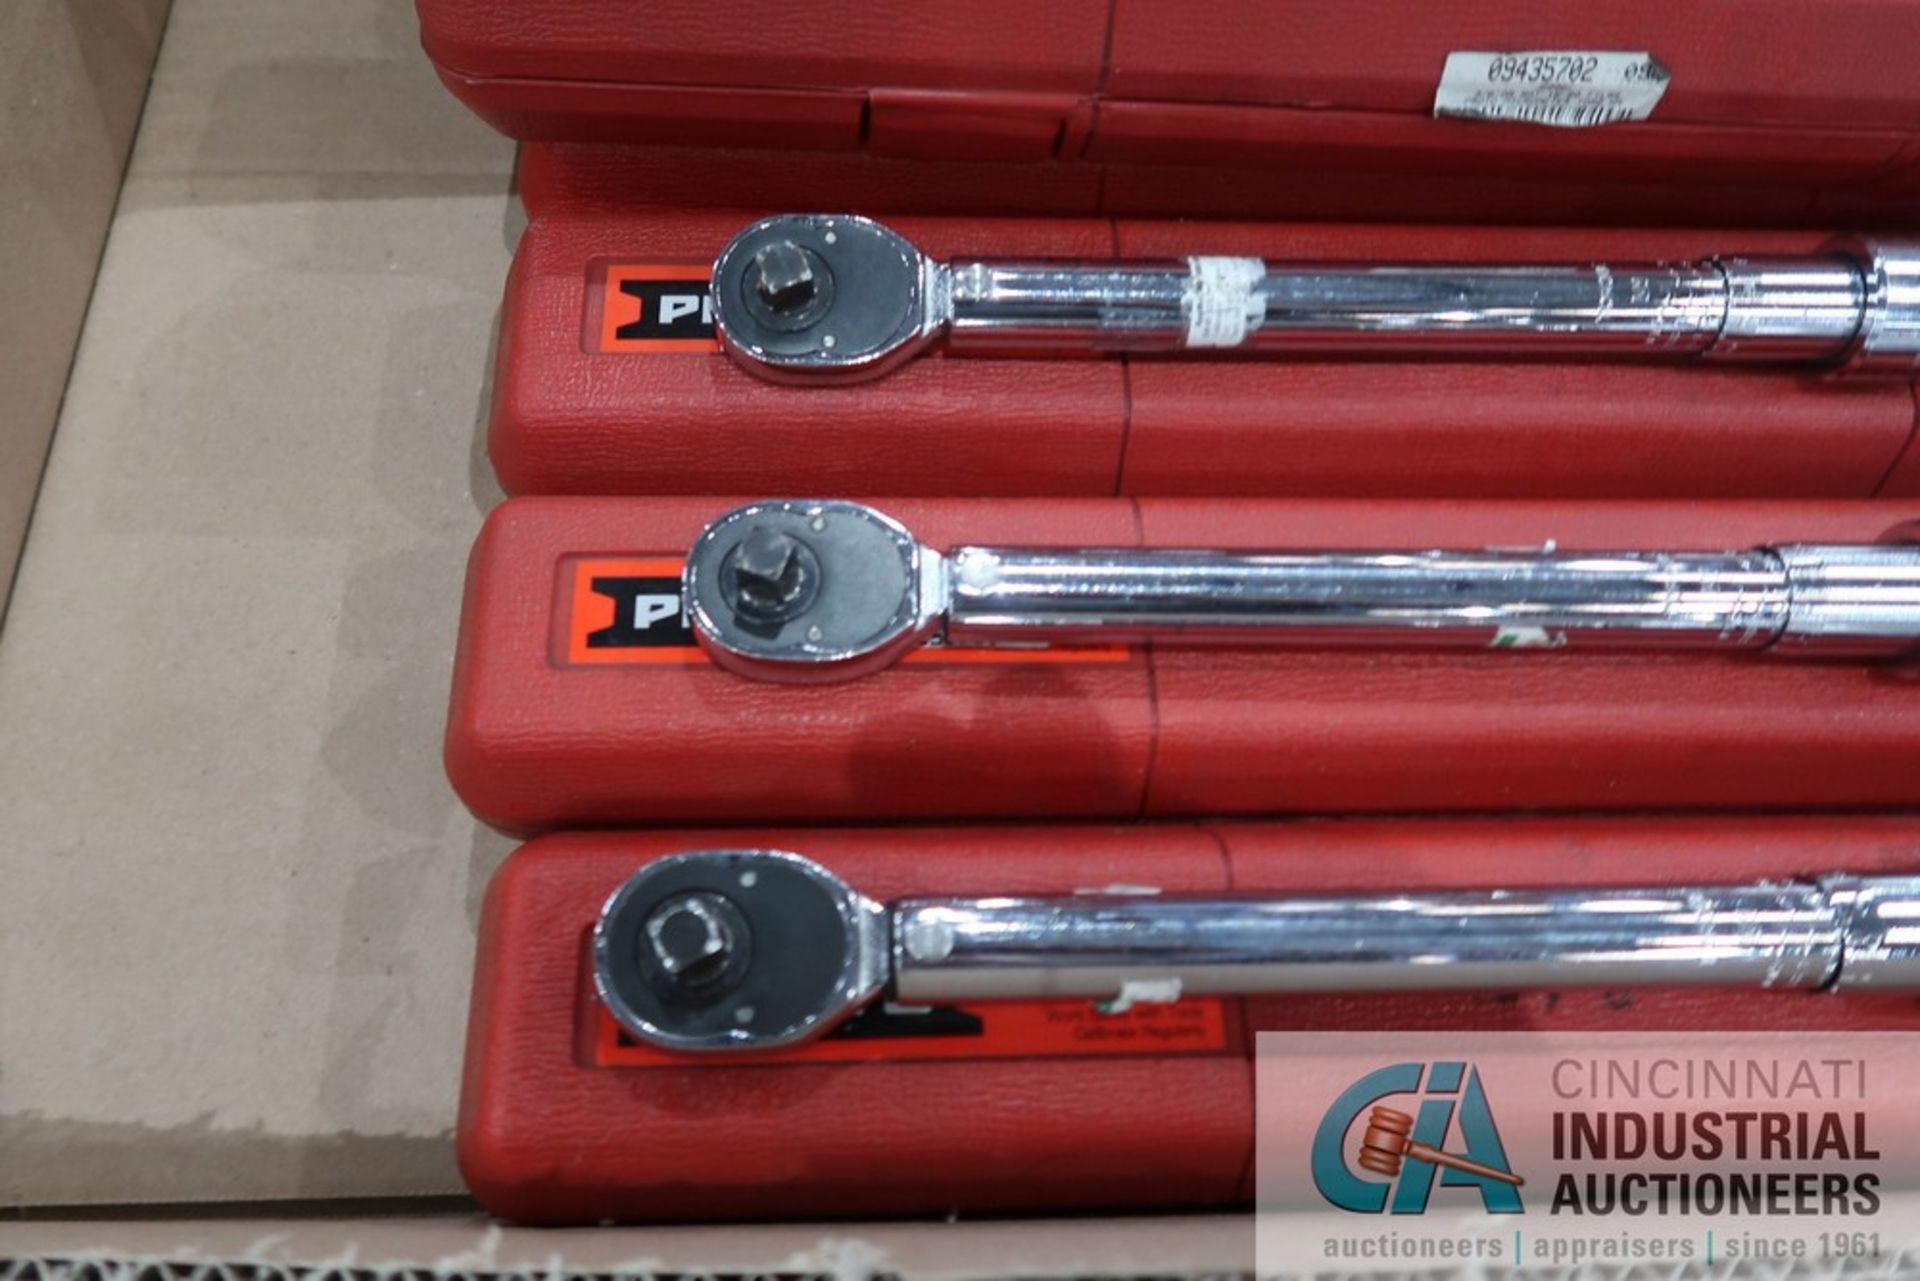 115 FT. LBS. X 3/8" DRIVE PROTO MODEL 6006C TORQUE WRENCHES - Image 2 of 2